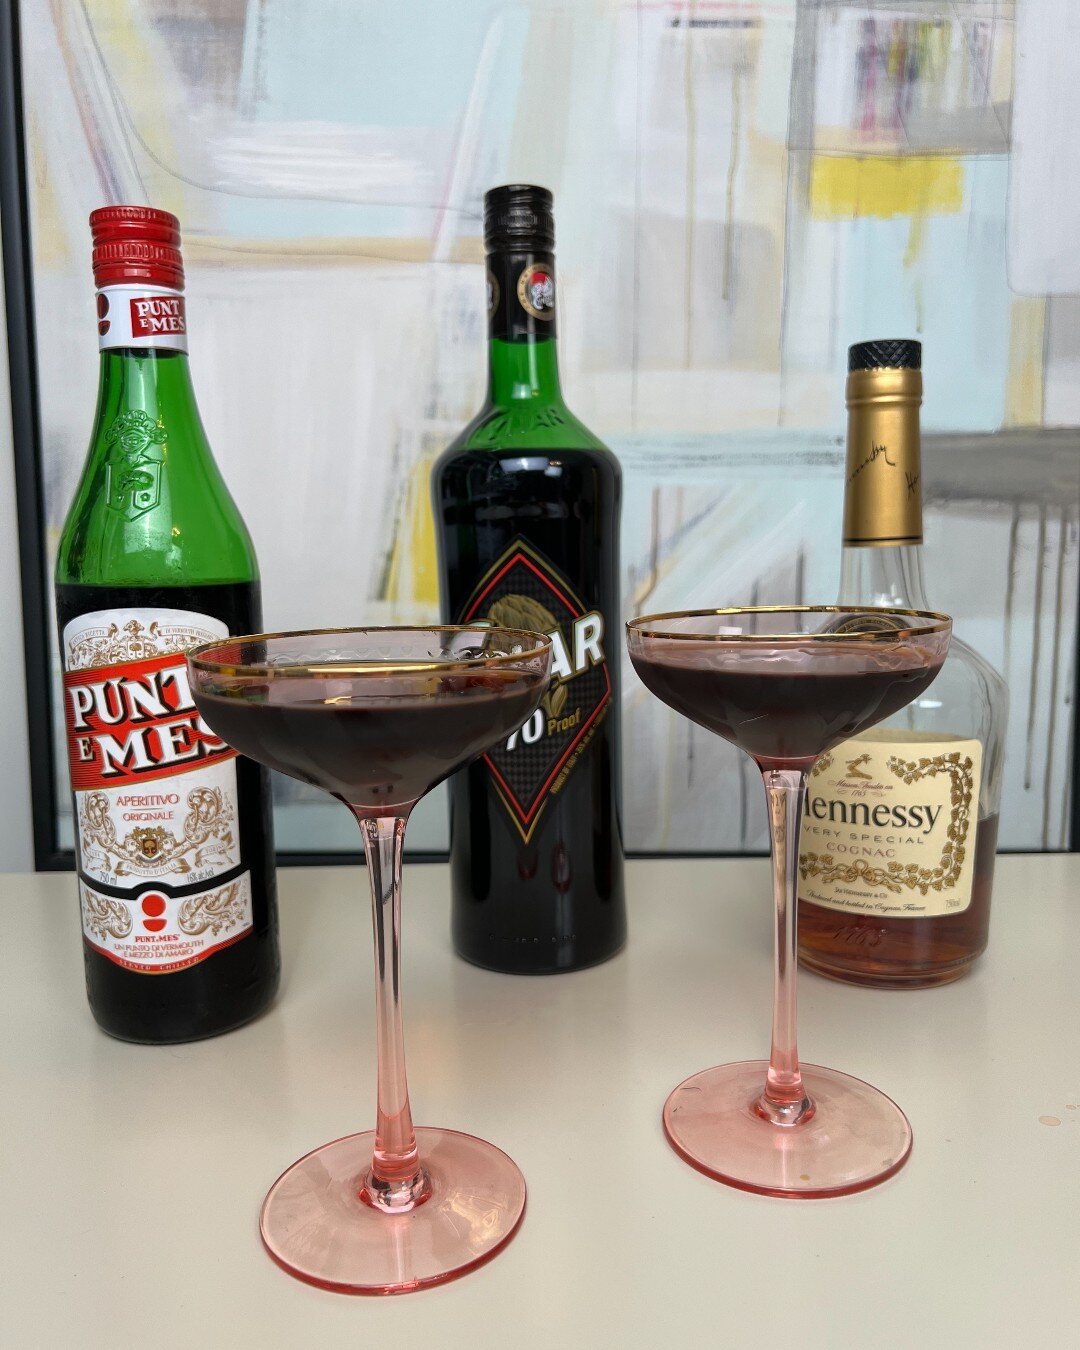 This one was a &quot;nope&quot; for us. The Popinjay:

* 1 ounce Cynar
* 1 ounce Cognac
* 1 ounce Punt e Mes

Chill a coupe glass. Add the Cynar, Cognac, and Punt e Mes to a mixing glass. Add ice and stir until thoroughly chilled, about 30 seconds. S